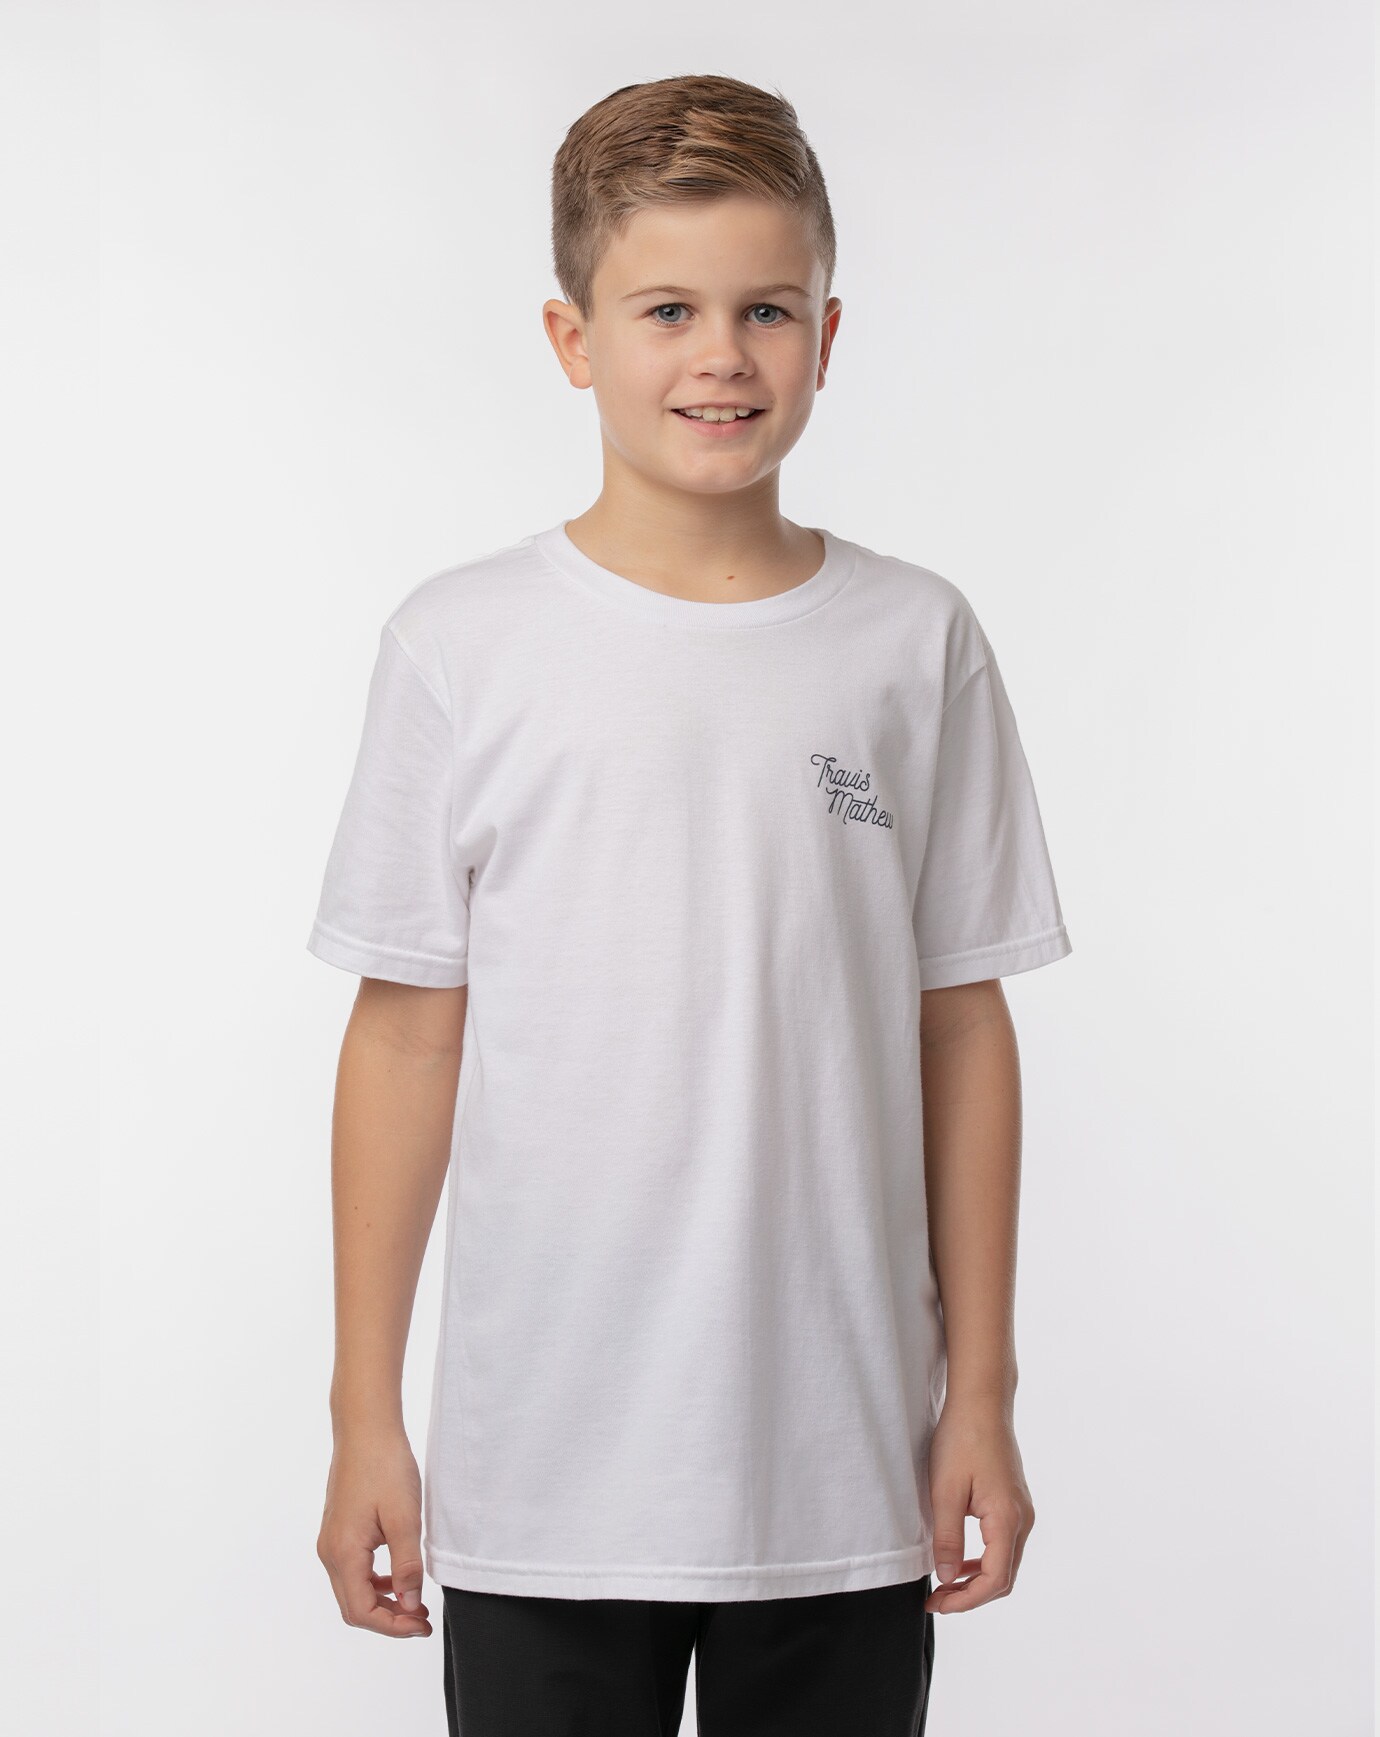 JAYUS YOUTH T-SHIRT_1BS111_1WHT_